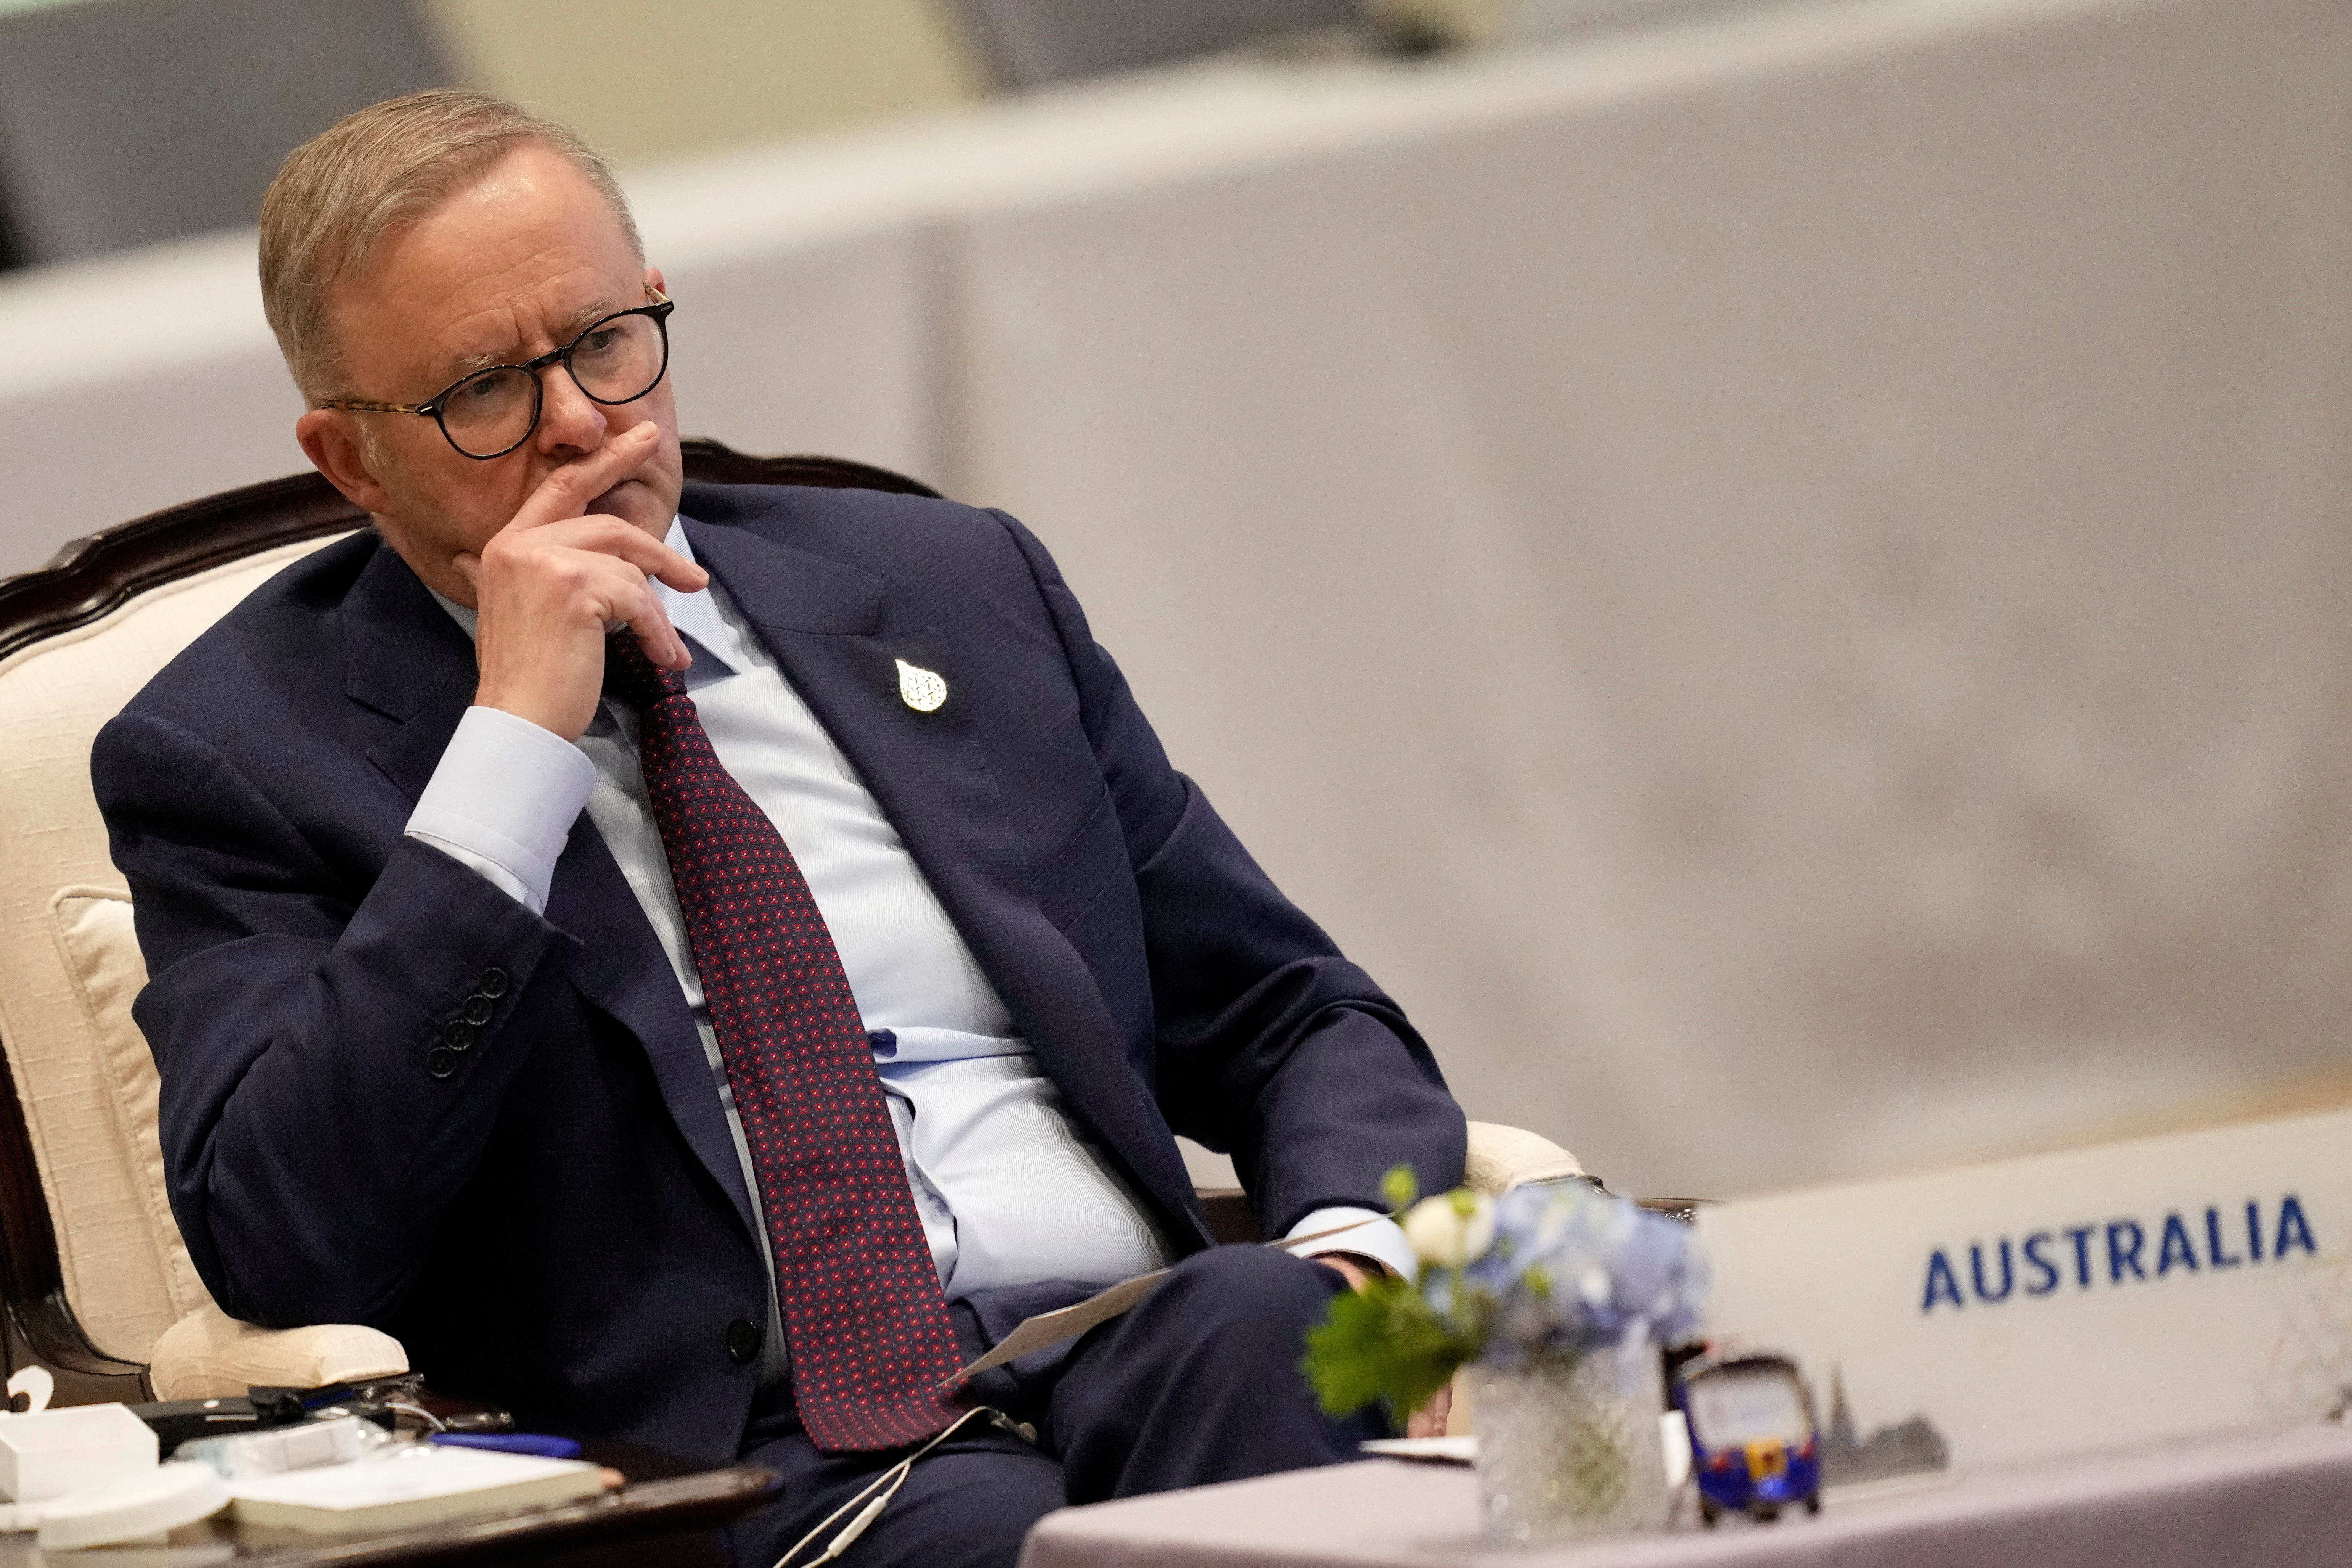 Australian Prime Minister Anthony Albanese attends the APEC Leader's Dialogue with APEC Business Advisory Council during the Asia-Pacific Economic Cooperation (APEC) summit, Friday, Nov. 18, 2022 in Bangkok